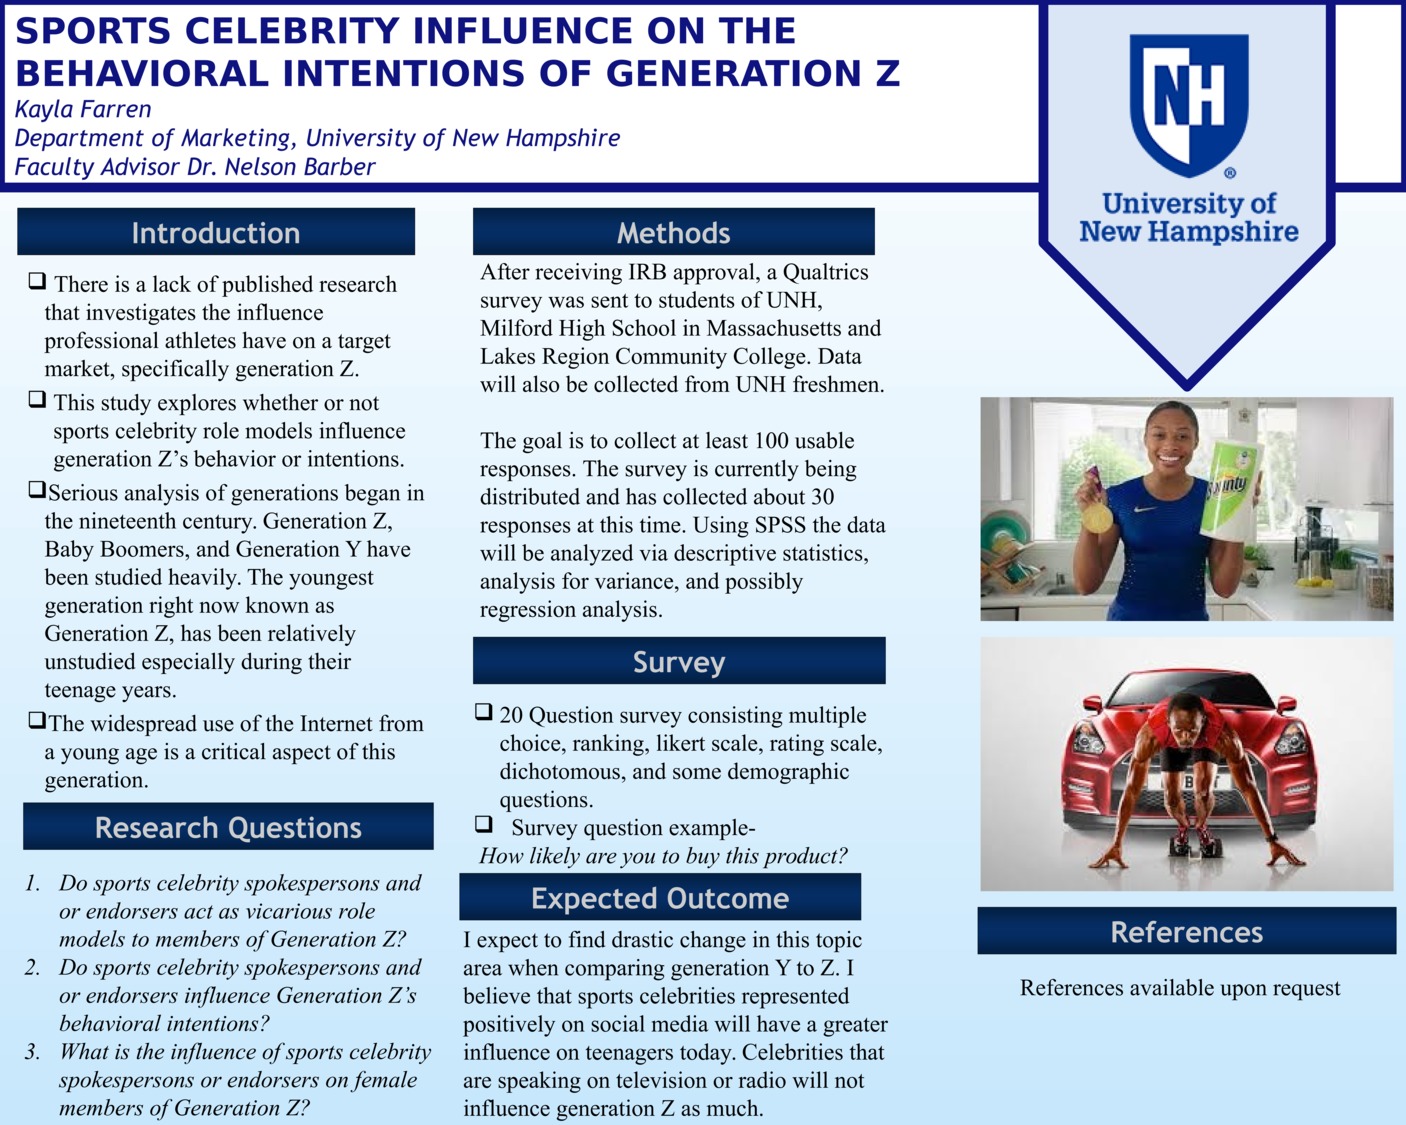 Sports Celebrity Influence On The Behavioral Intentions Of Generation Z by kmf2001